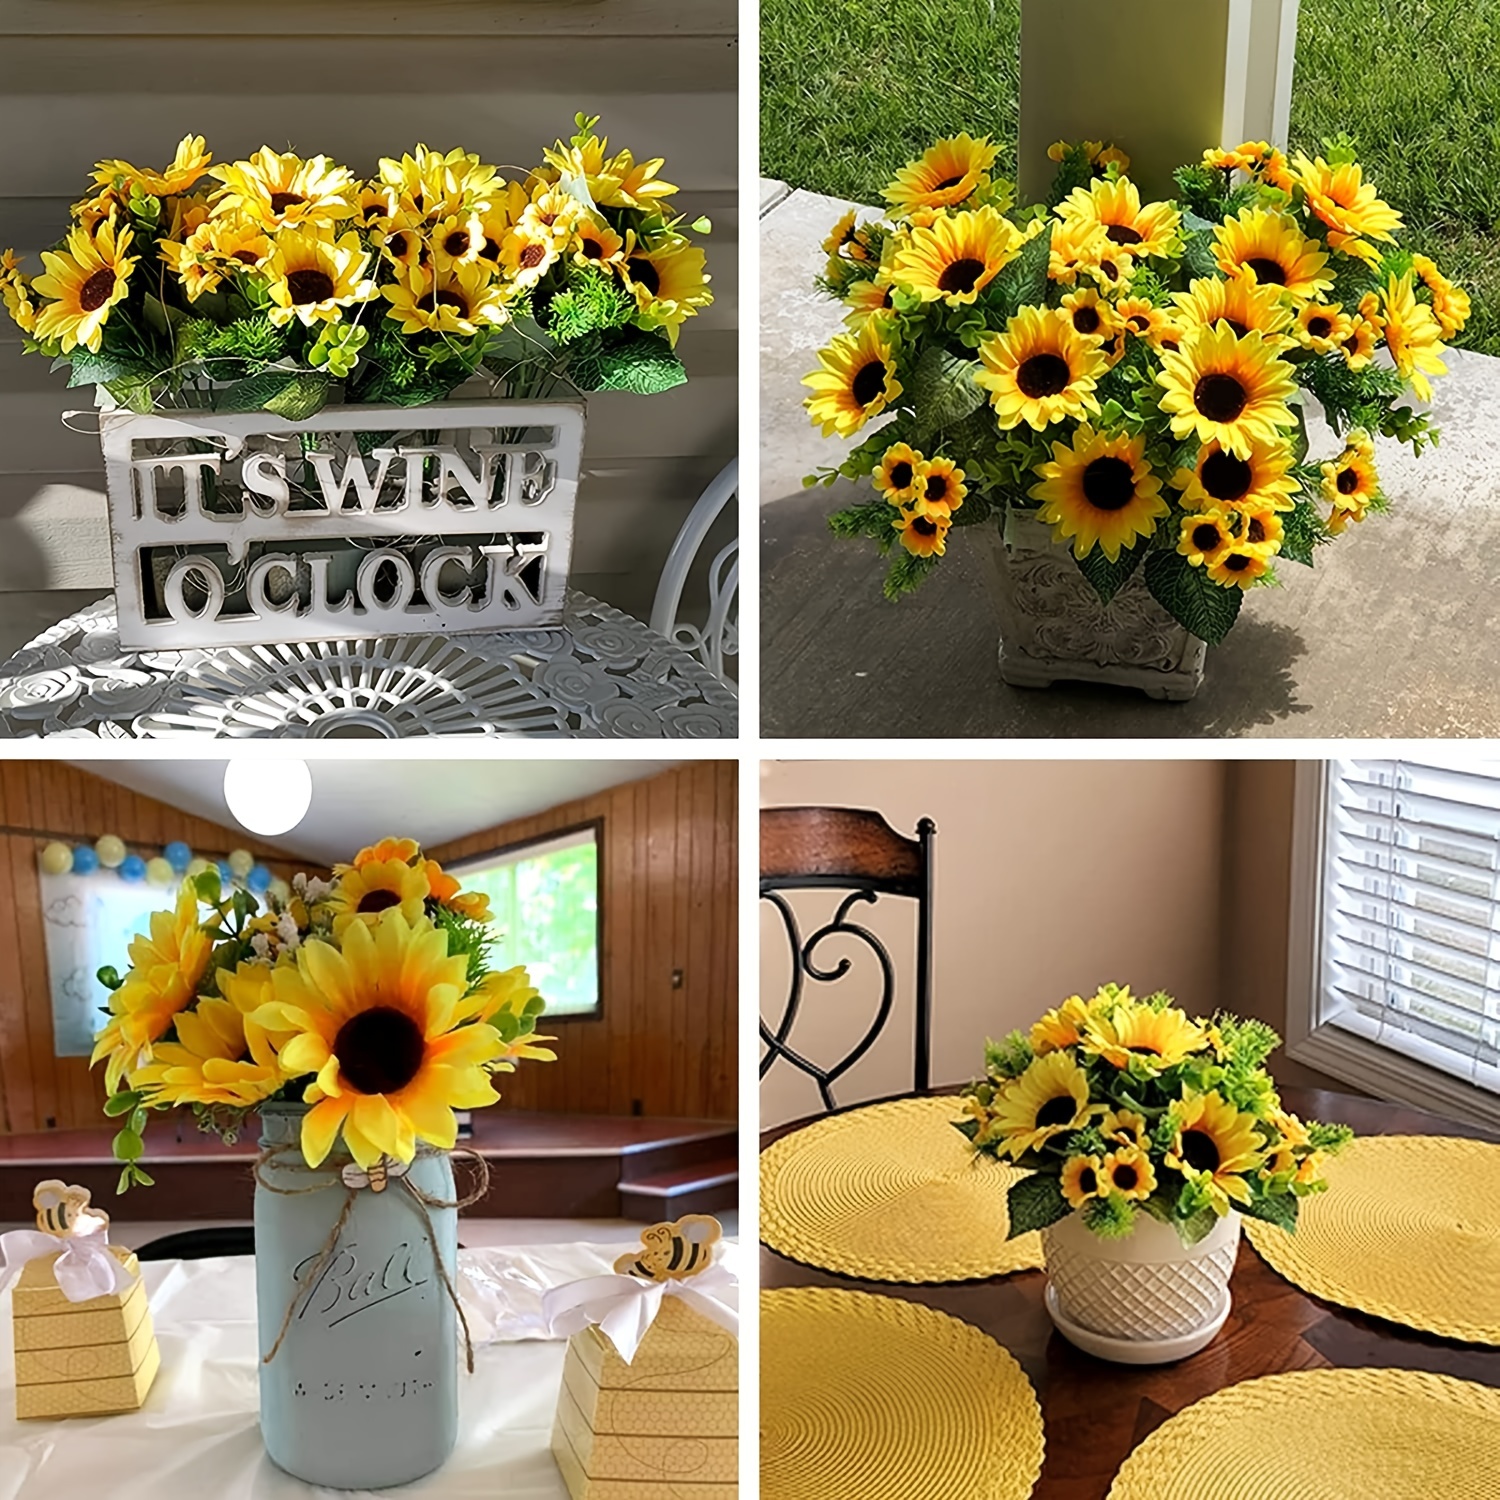 6PCS Large Sunflowers Artificial Flowers with Long Stem Fake Silk  Sunflowers Bulk Decoration for Home Wedding Outdoors Party Baby Shower  (Orange)